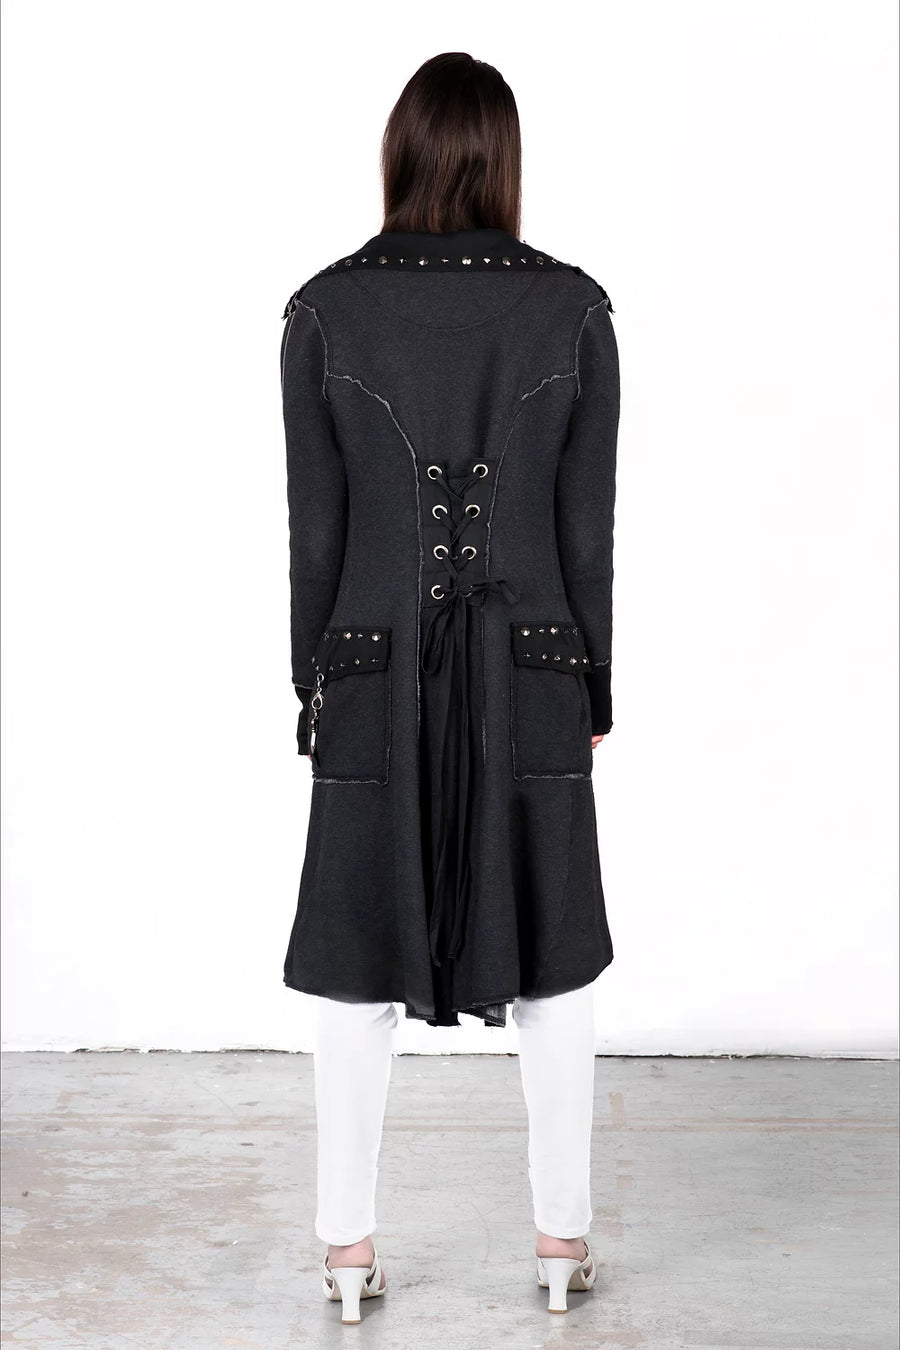 Christian Scripture Coat "Armor of God" by Sanctified Couture